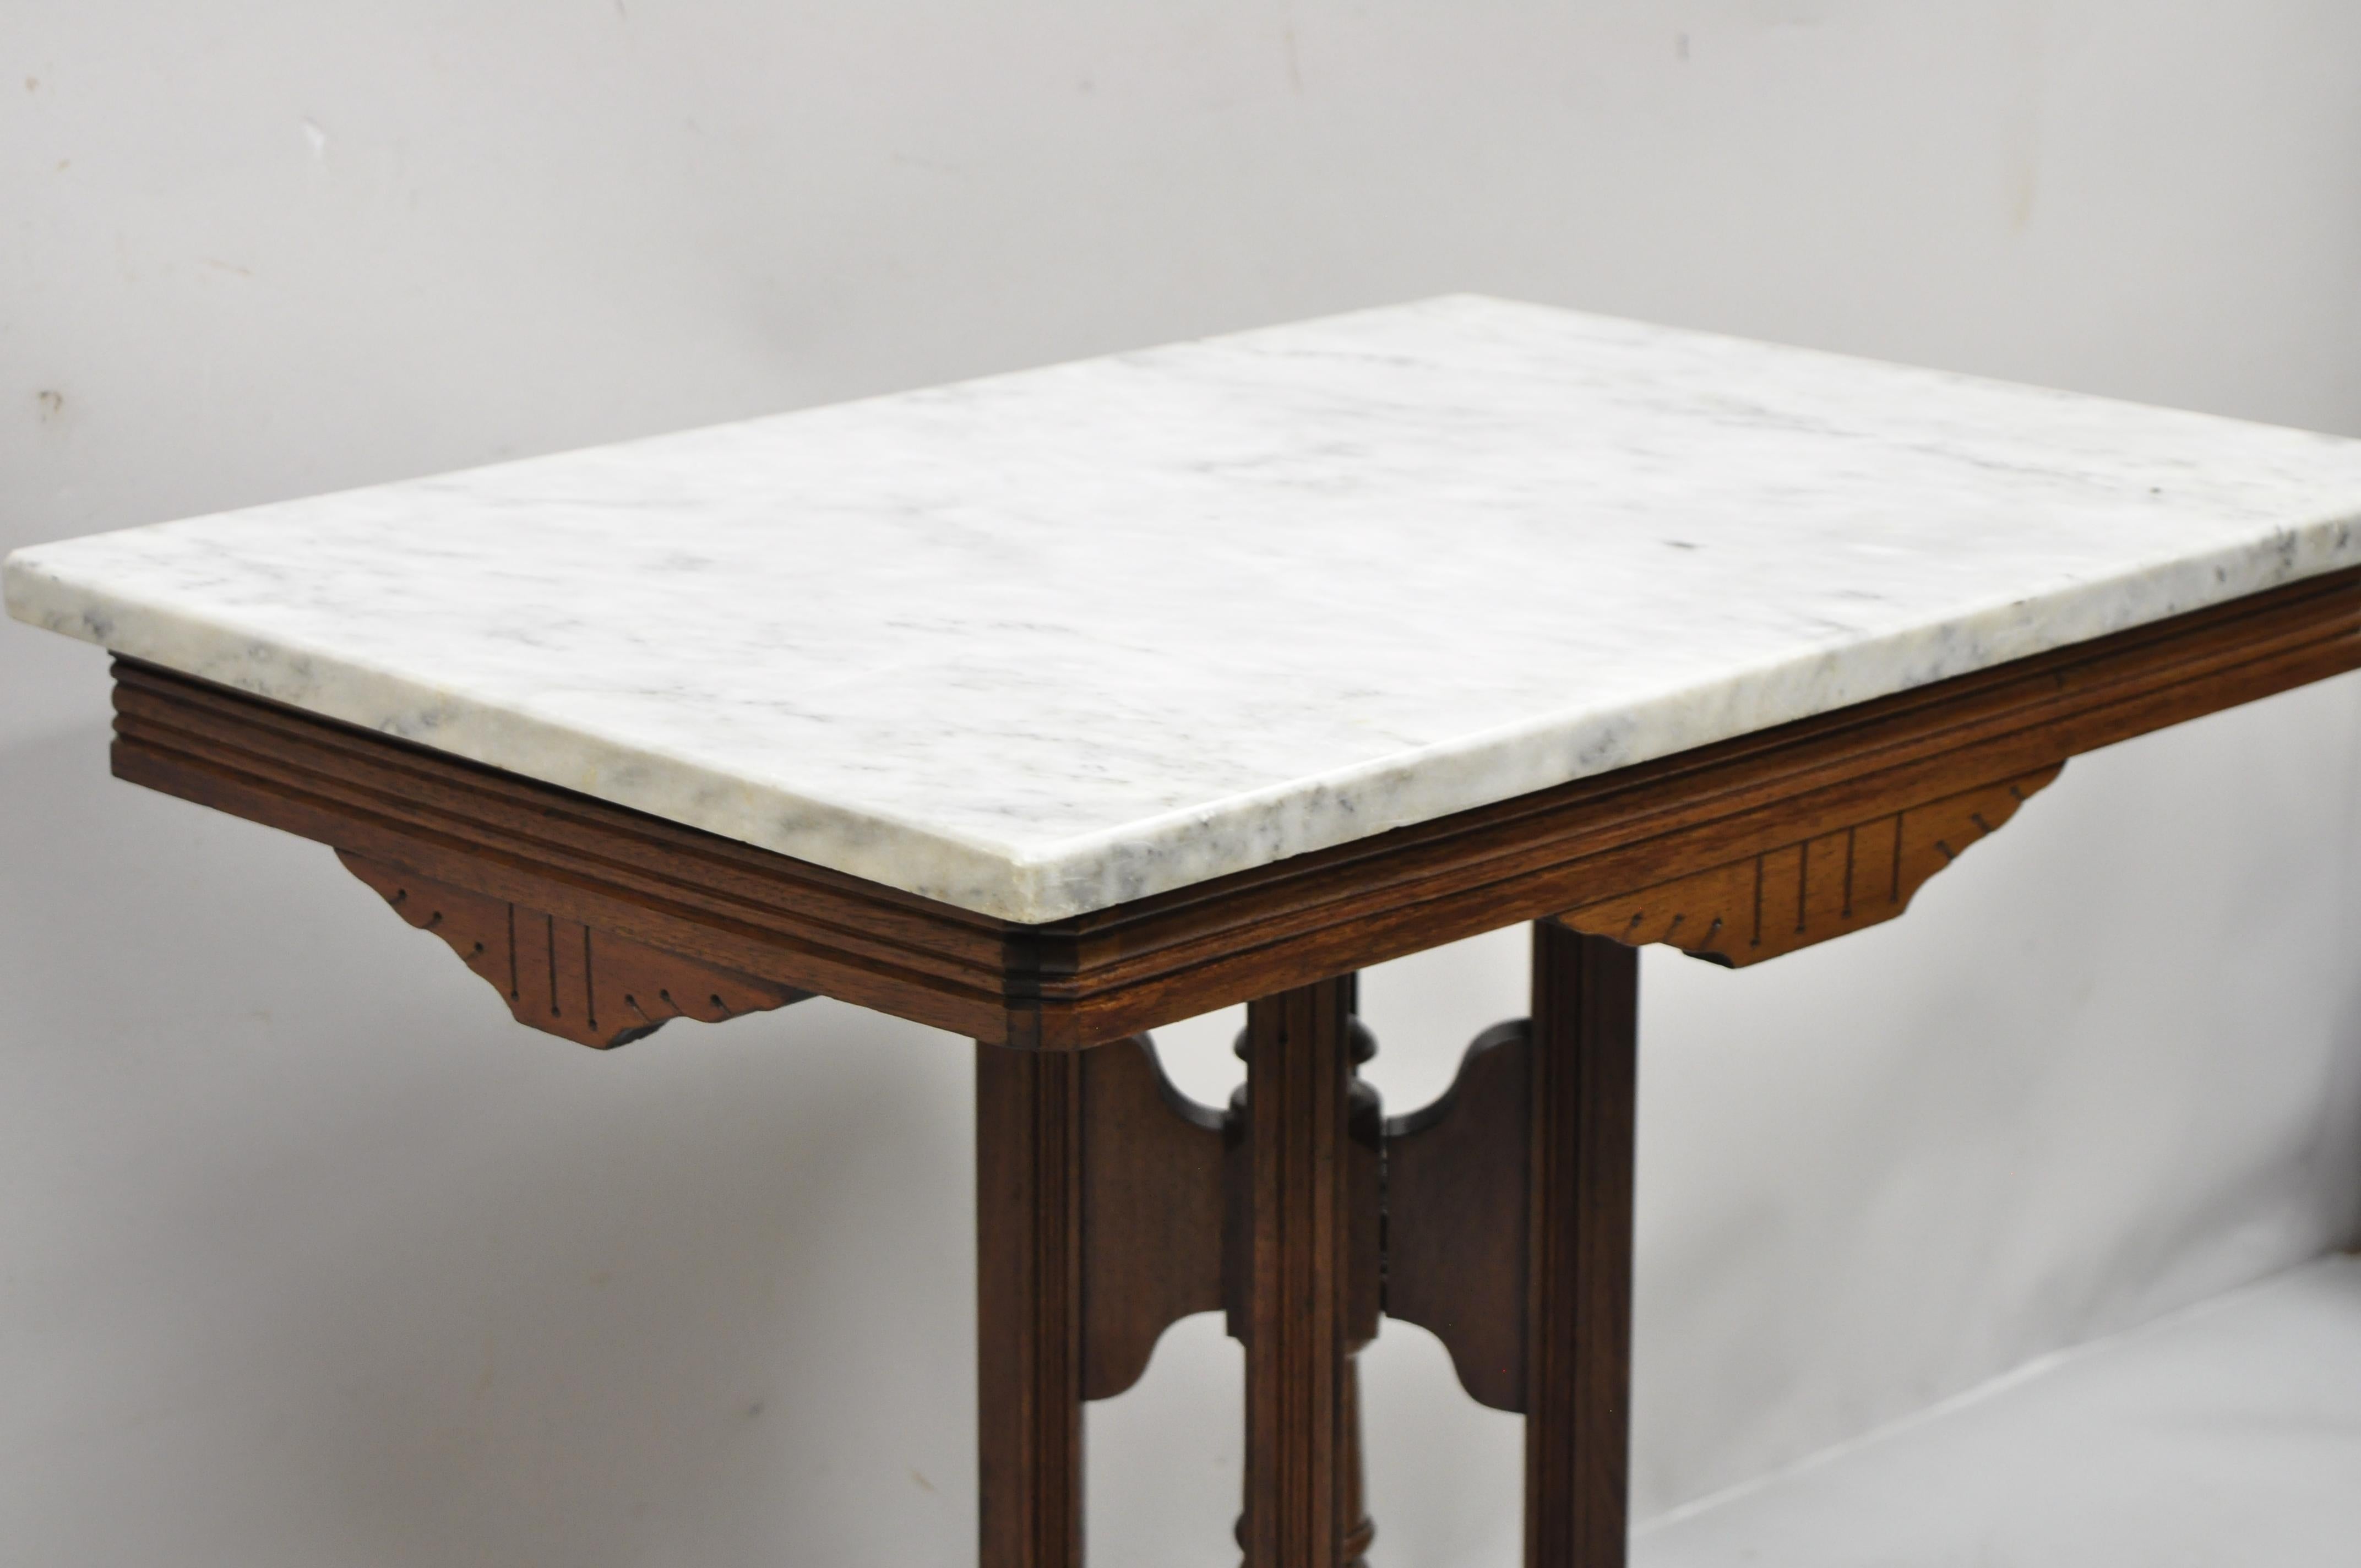 North American Antique Eastlake Victorian Walnut Marble Top Parlor Lamp Side Table